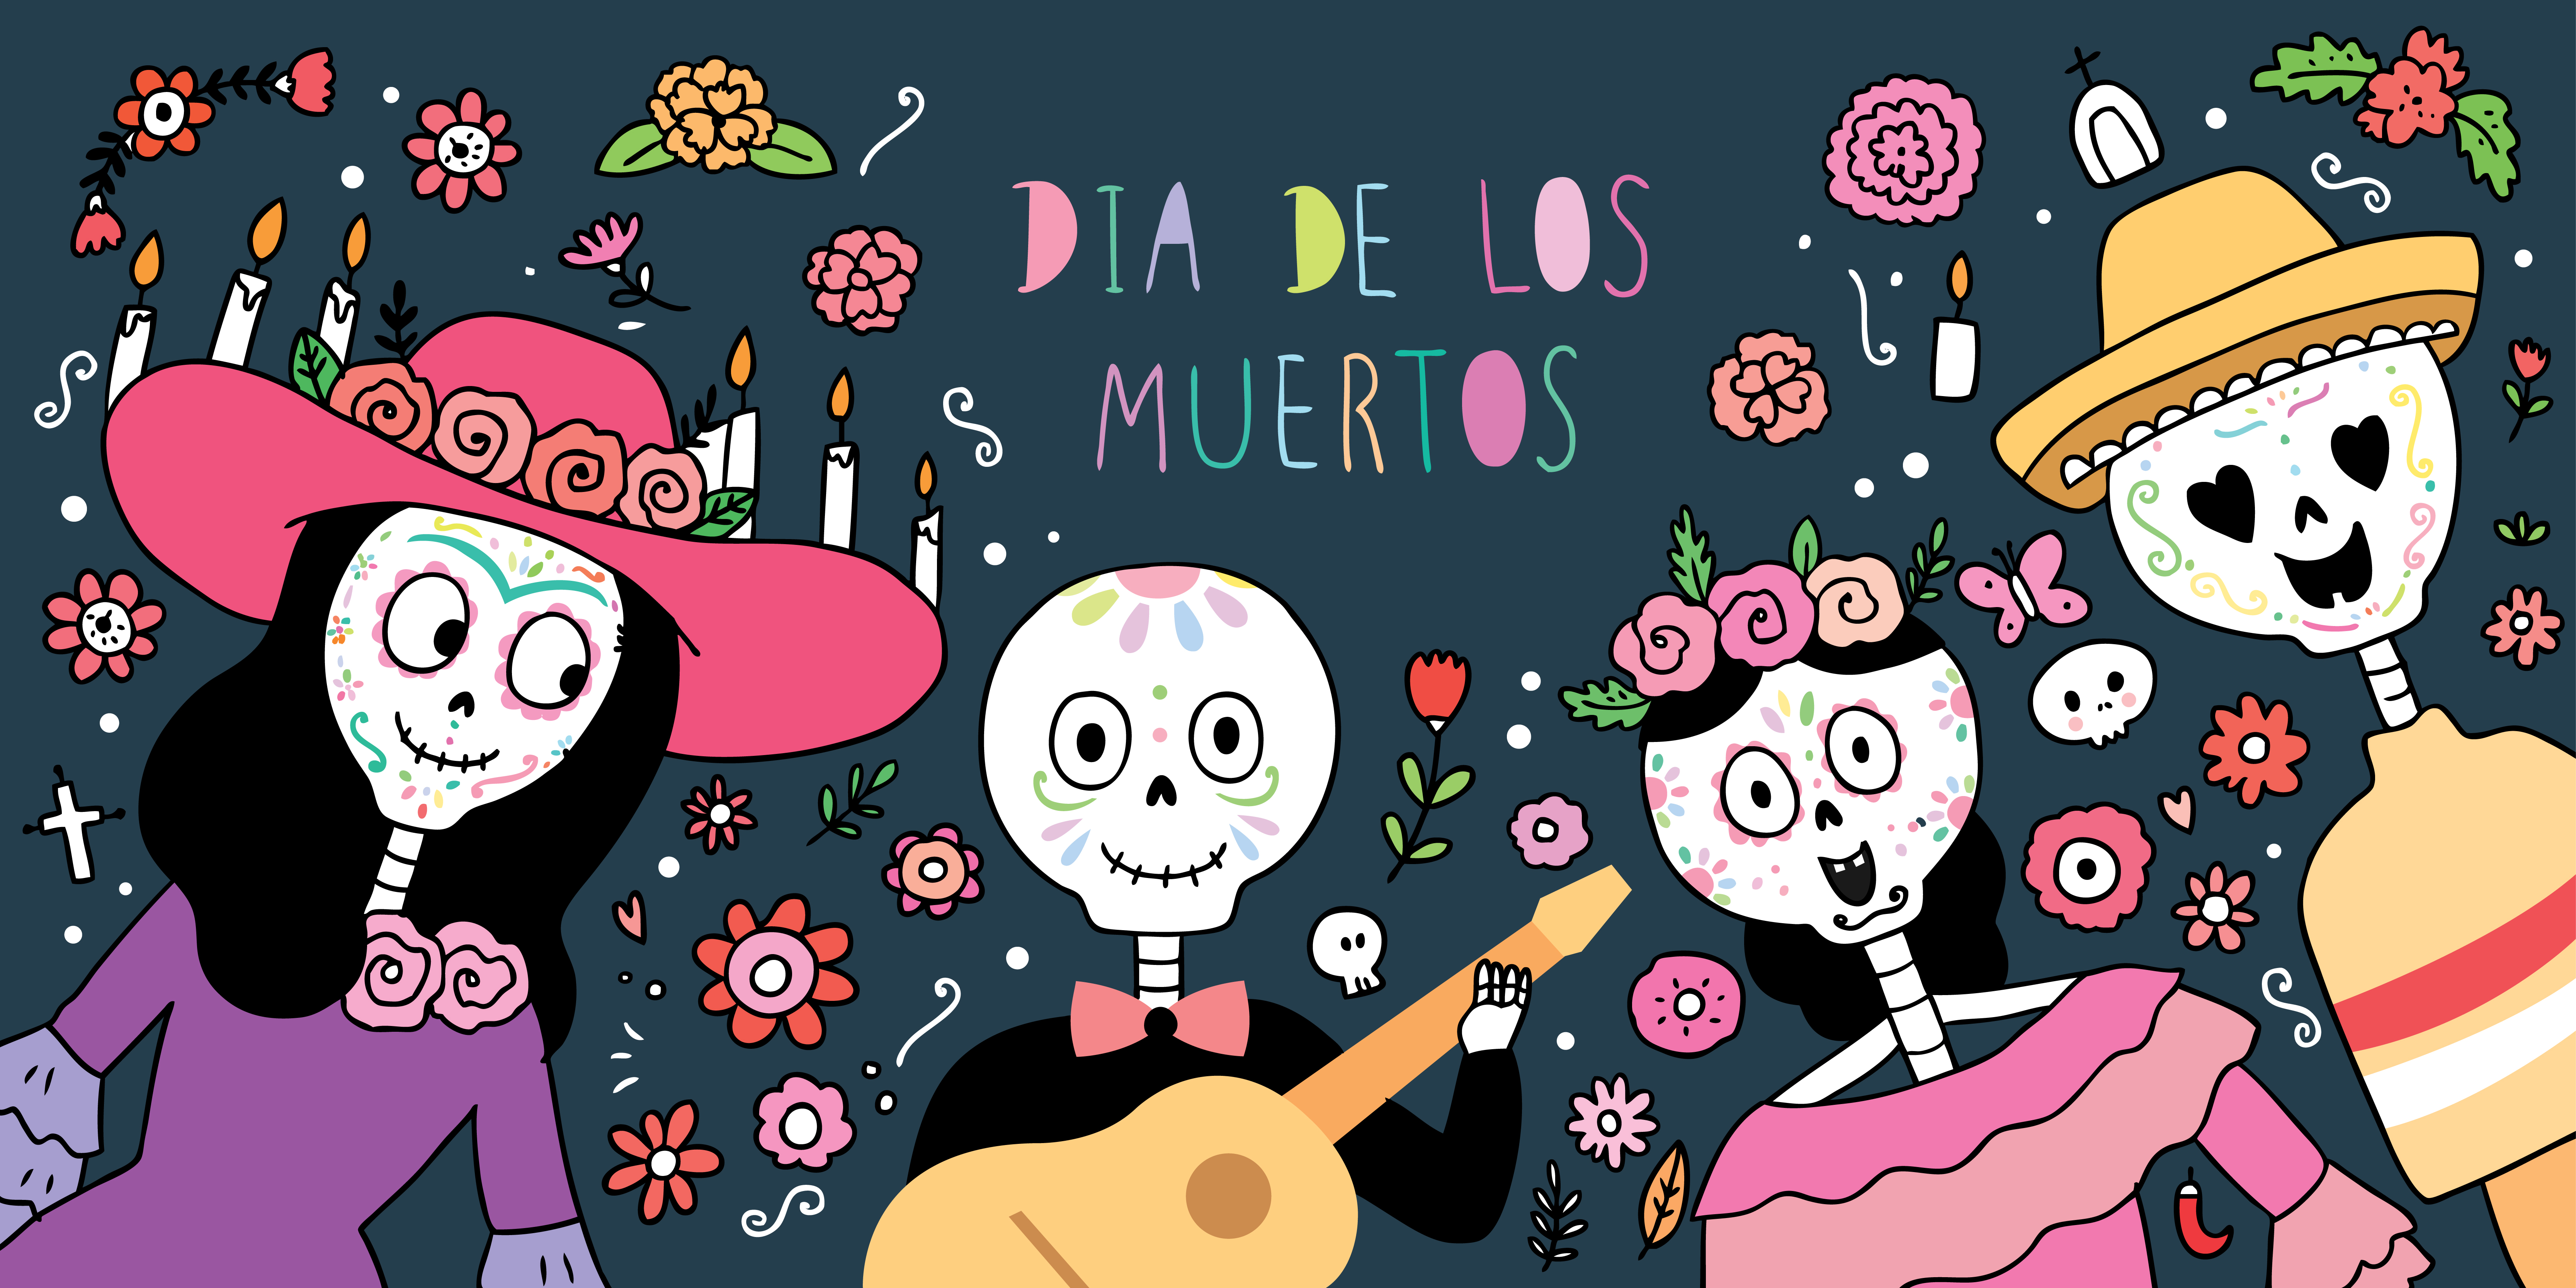 Download Day of the dead 671447 - Download Free Vectors, Clipart ...